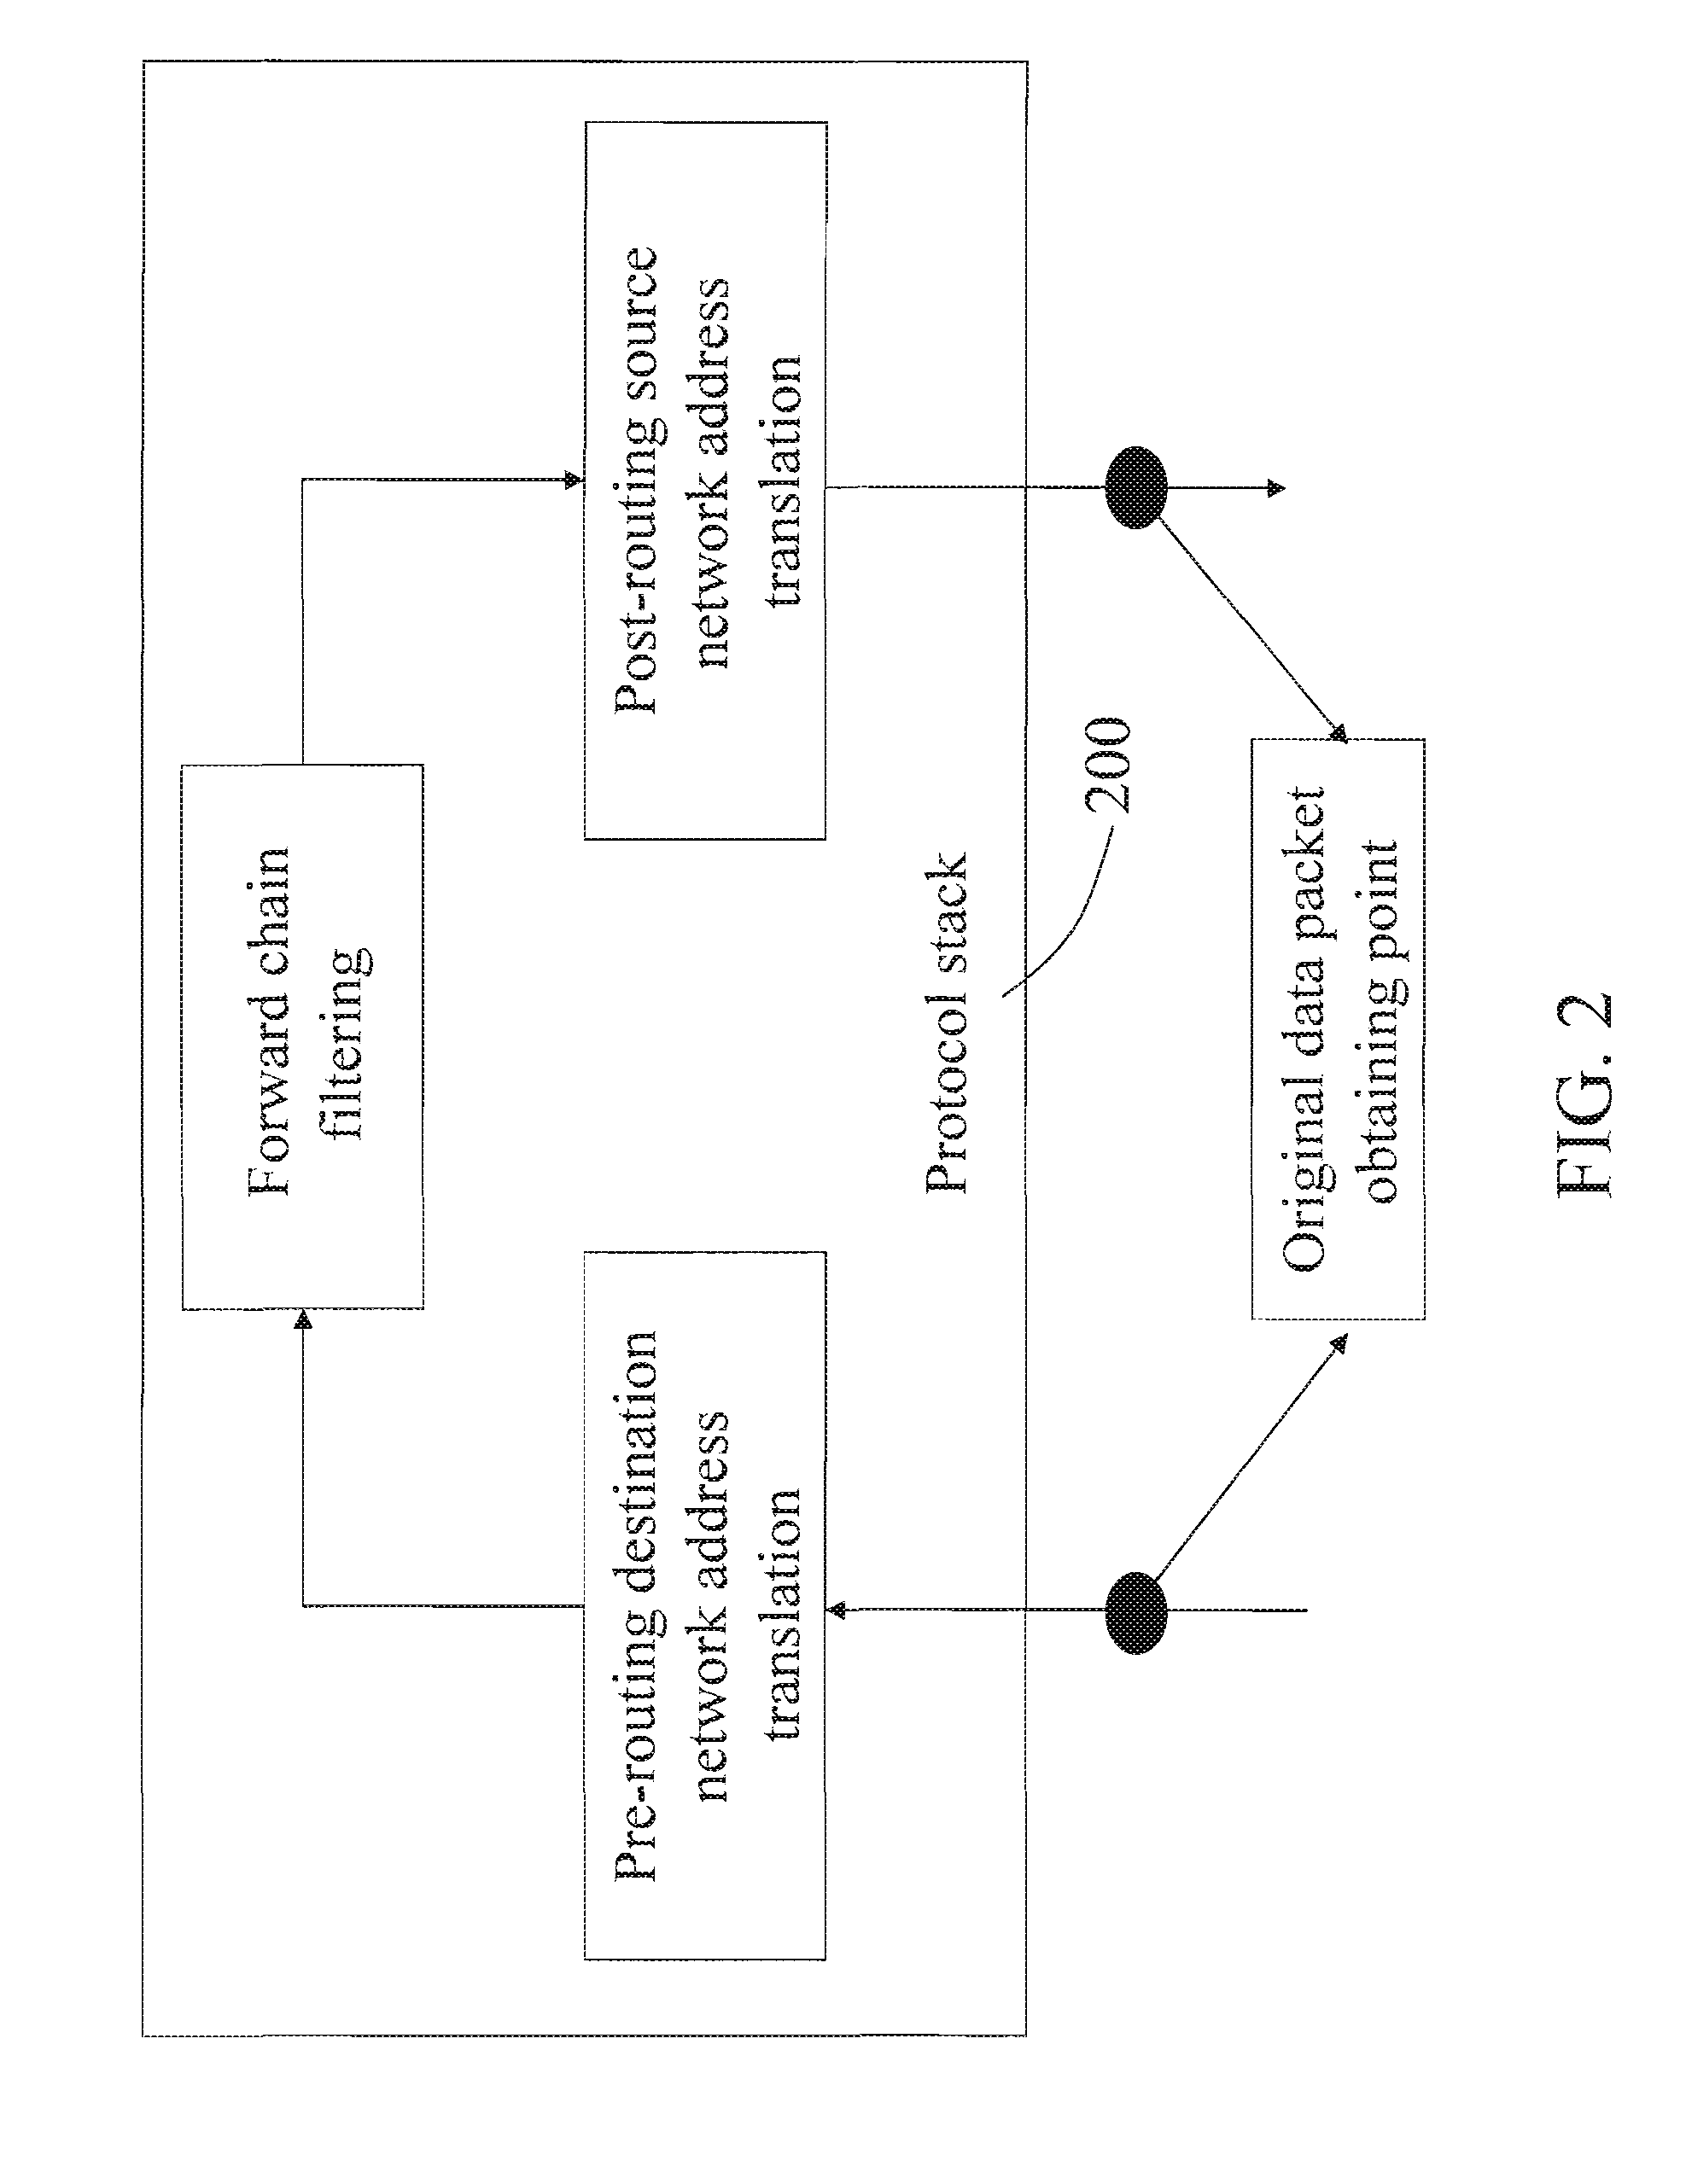 Method for obtaining data for intrusion detection